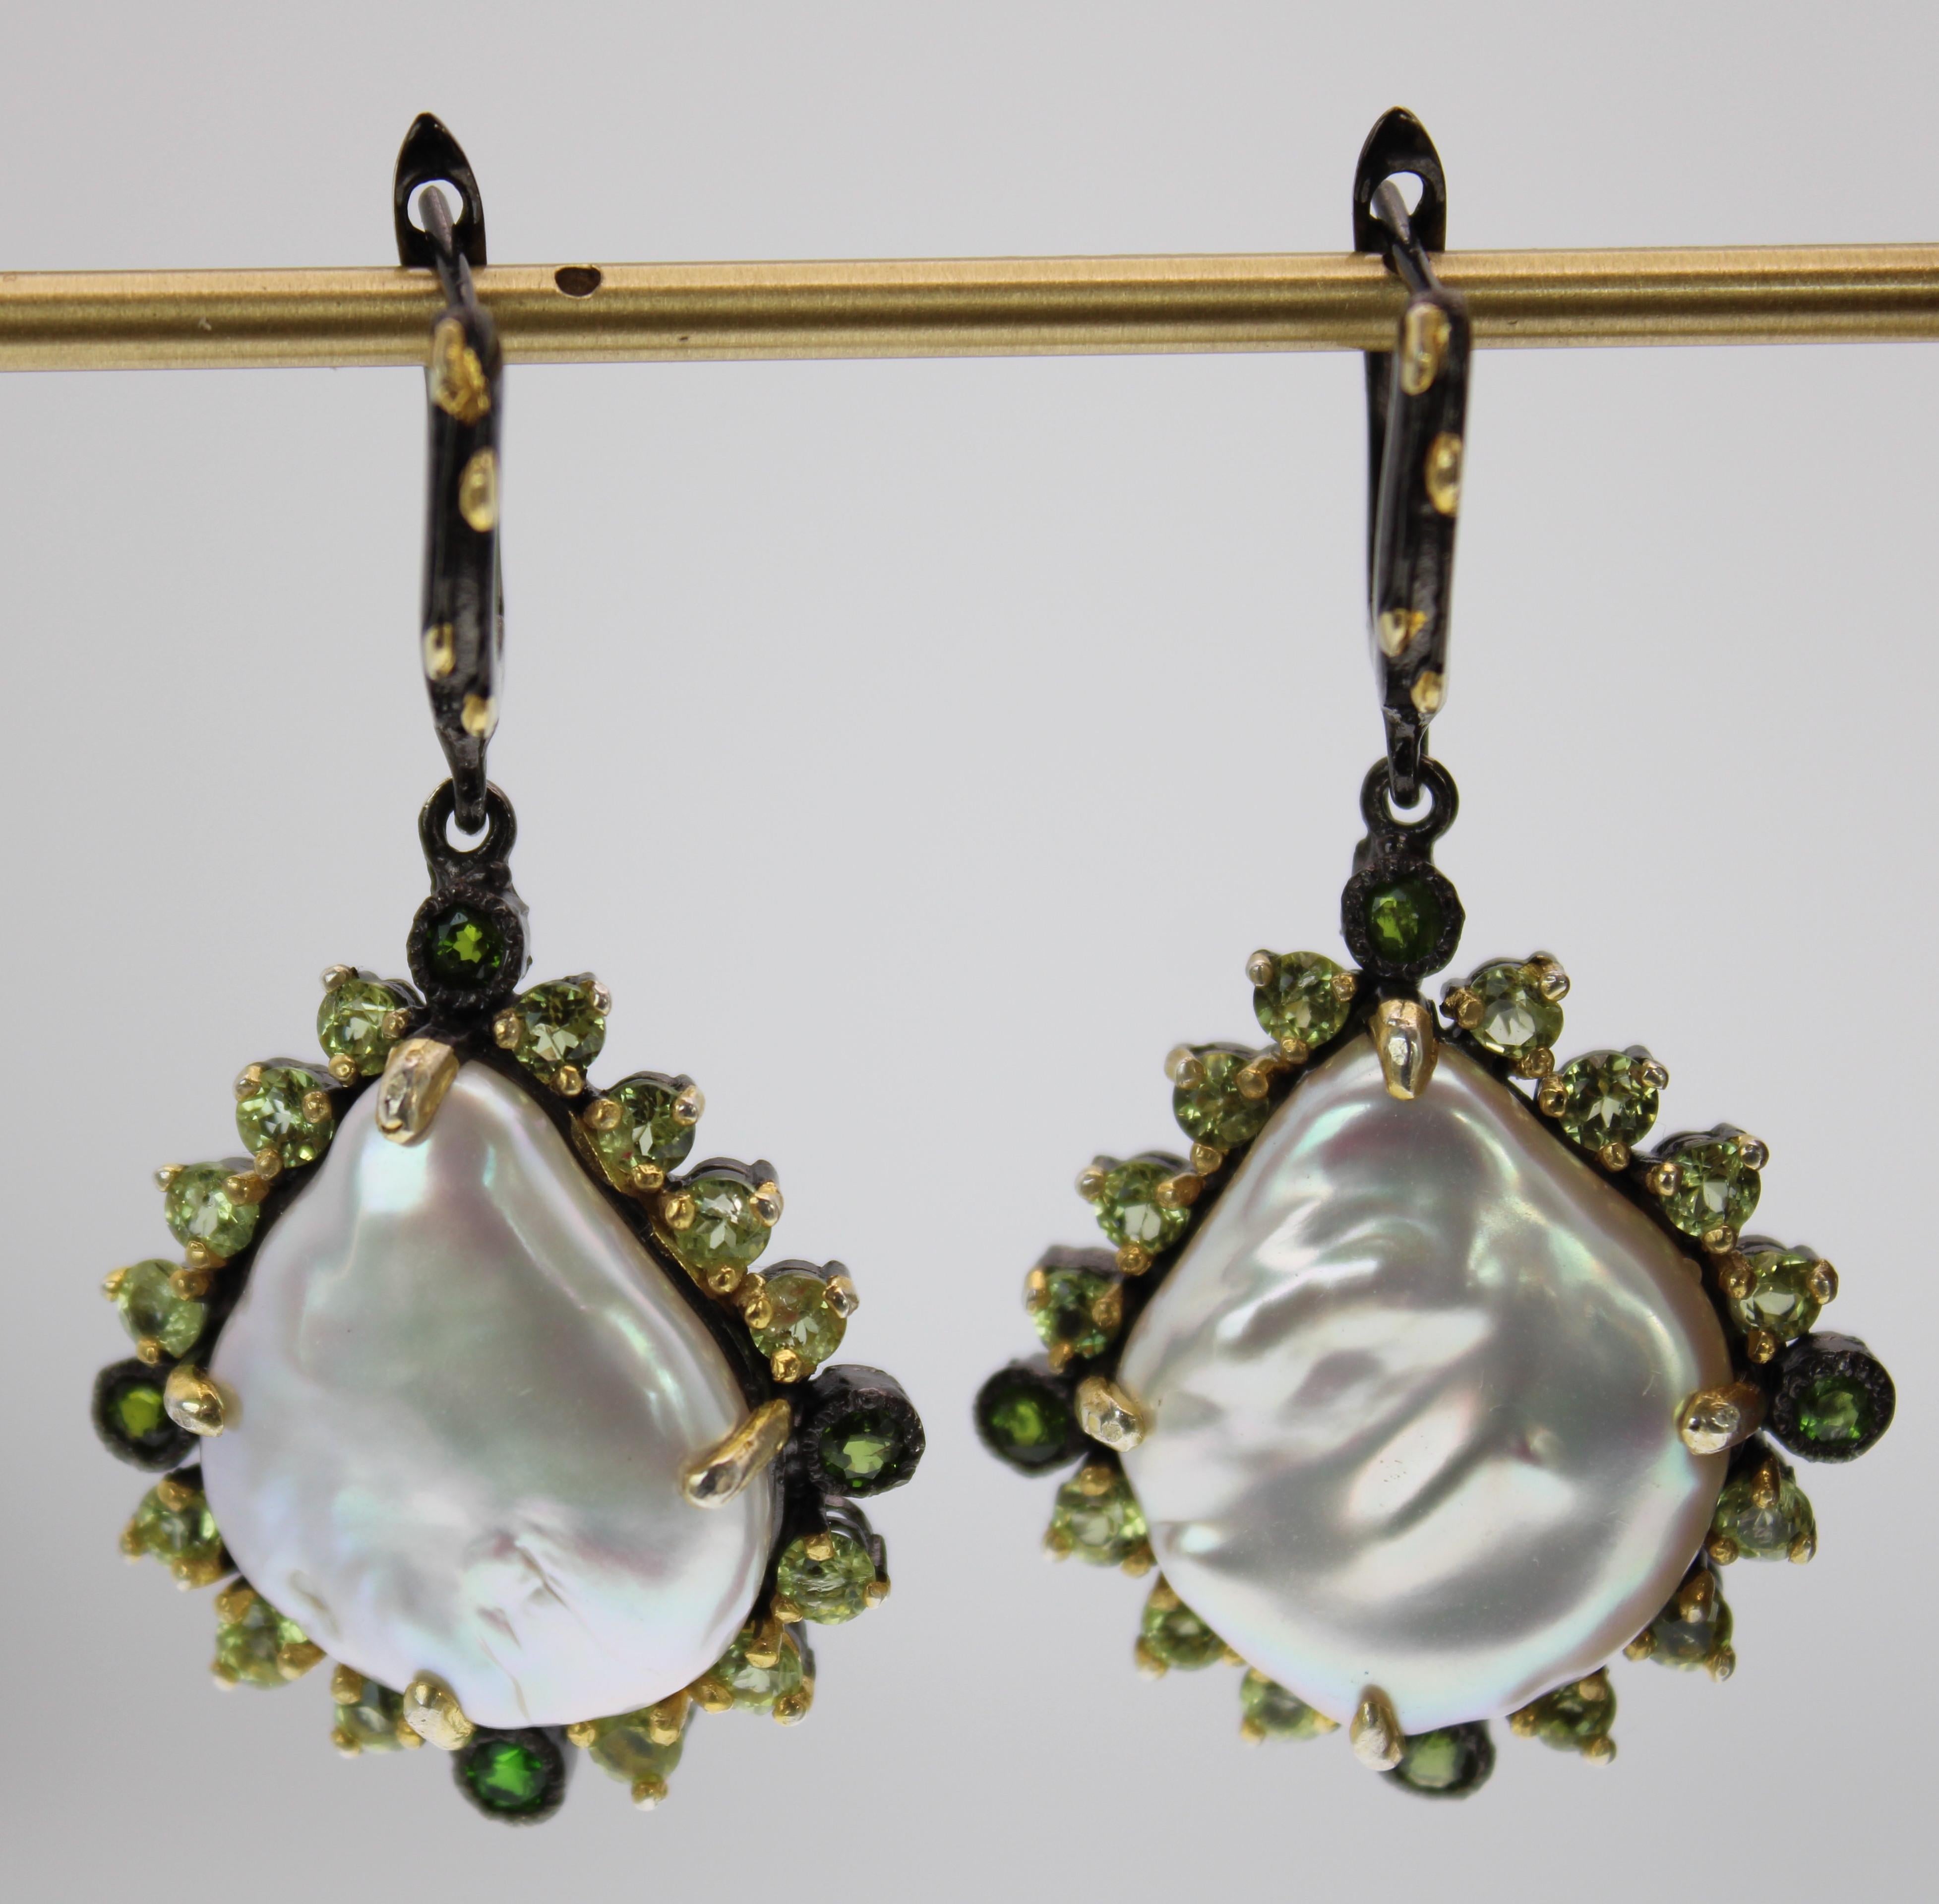 Natural Baroque Pearl Earrings with beautiful iridescent color. The pearls are surrounded by 18 green onyx and peridot round stones. The earrings are set in mixed metal showcasing black rhodium and gold plating details over sterling silver. 
They